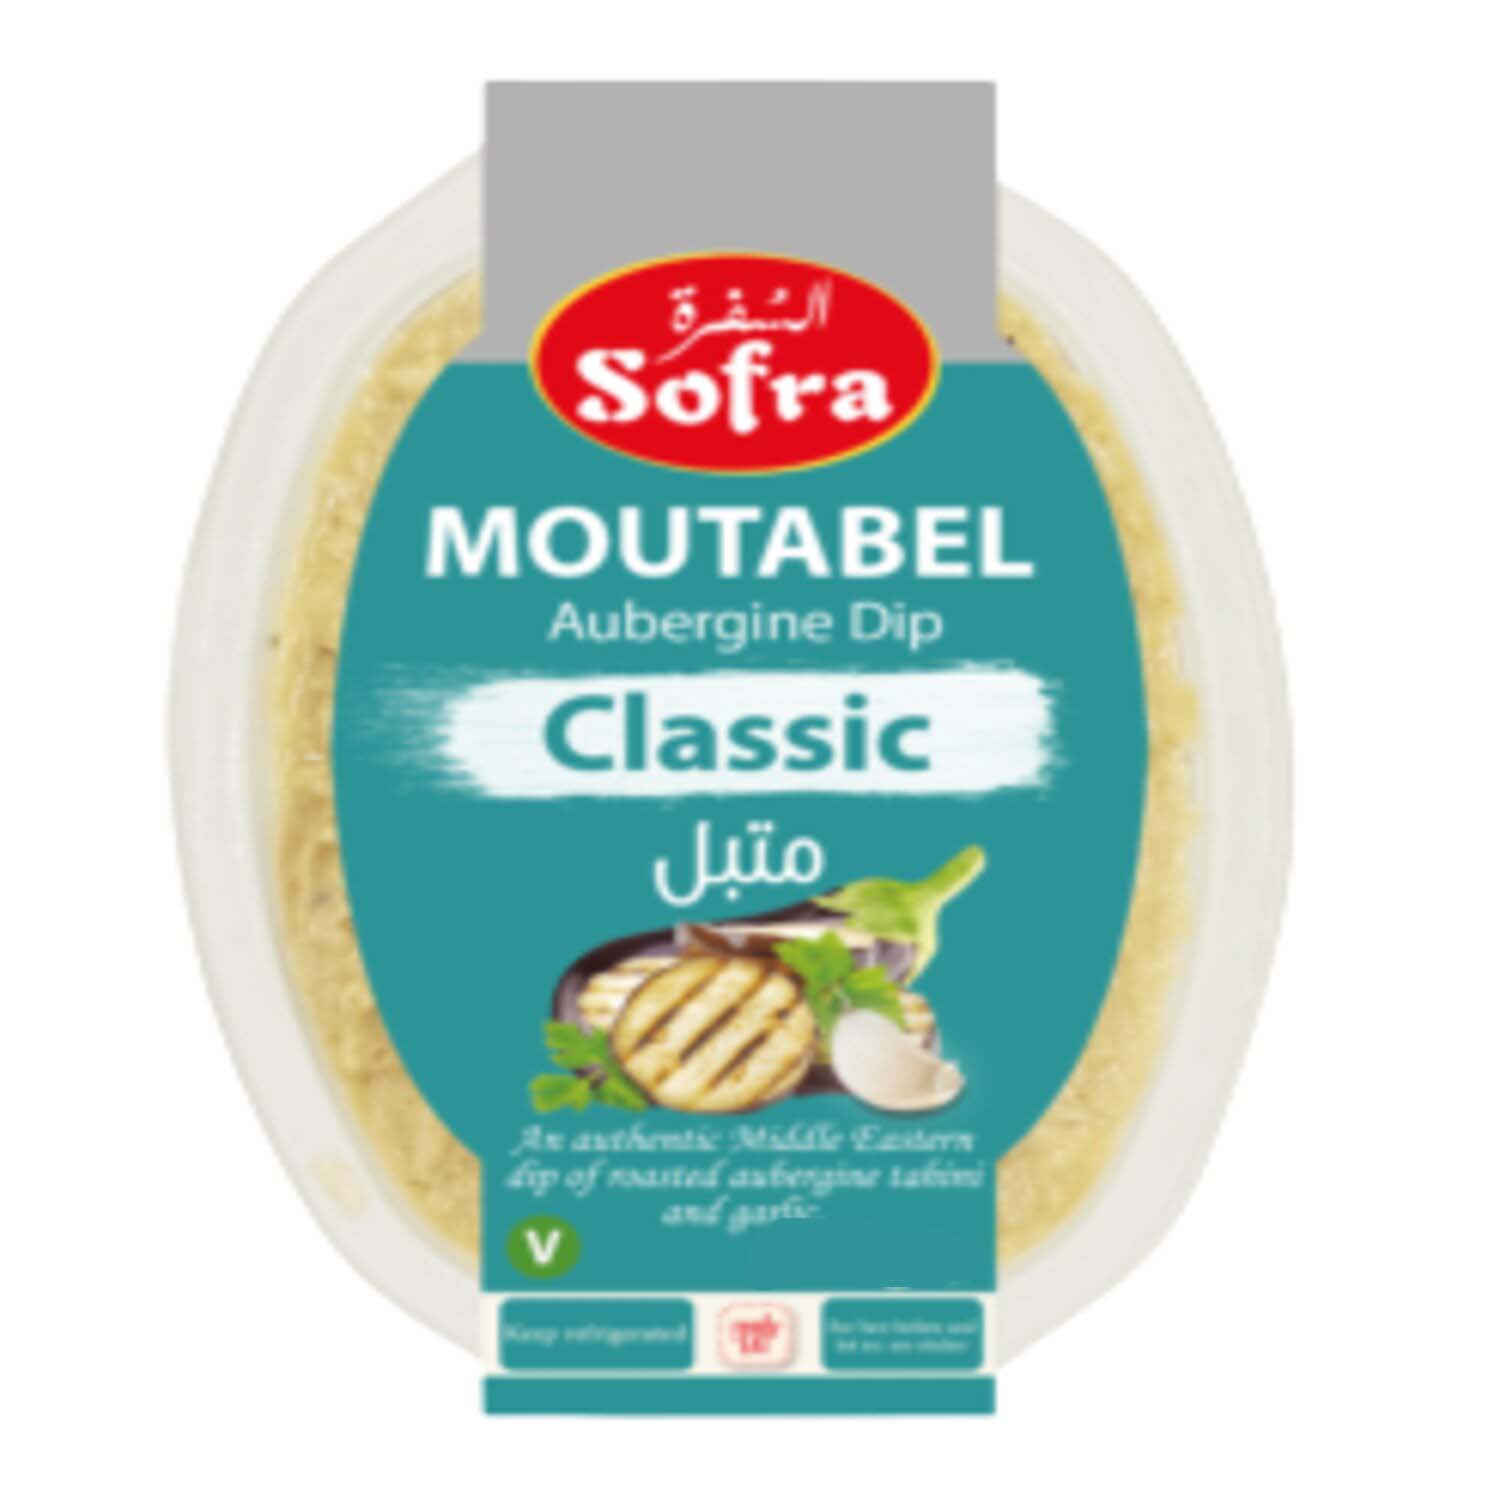 Offer Sofra Moutabel Aubergine Dip Classic 240g X 3 pcs